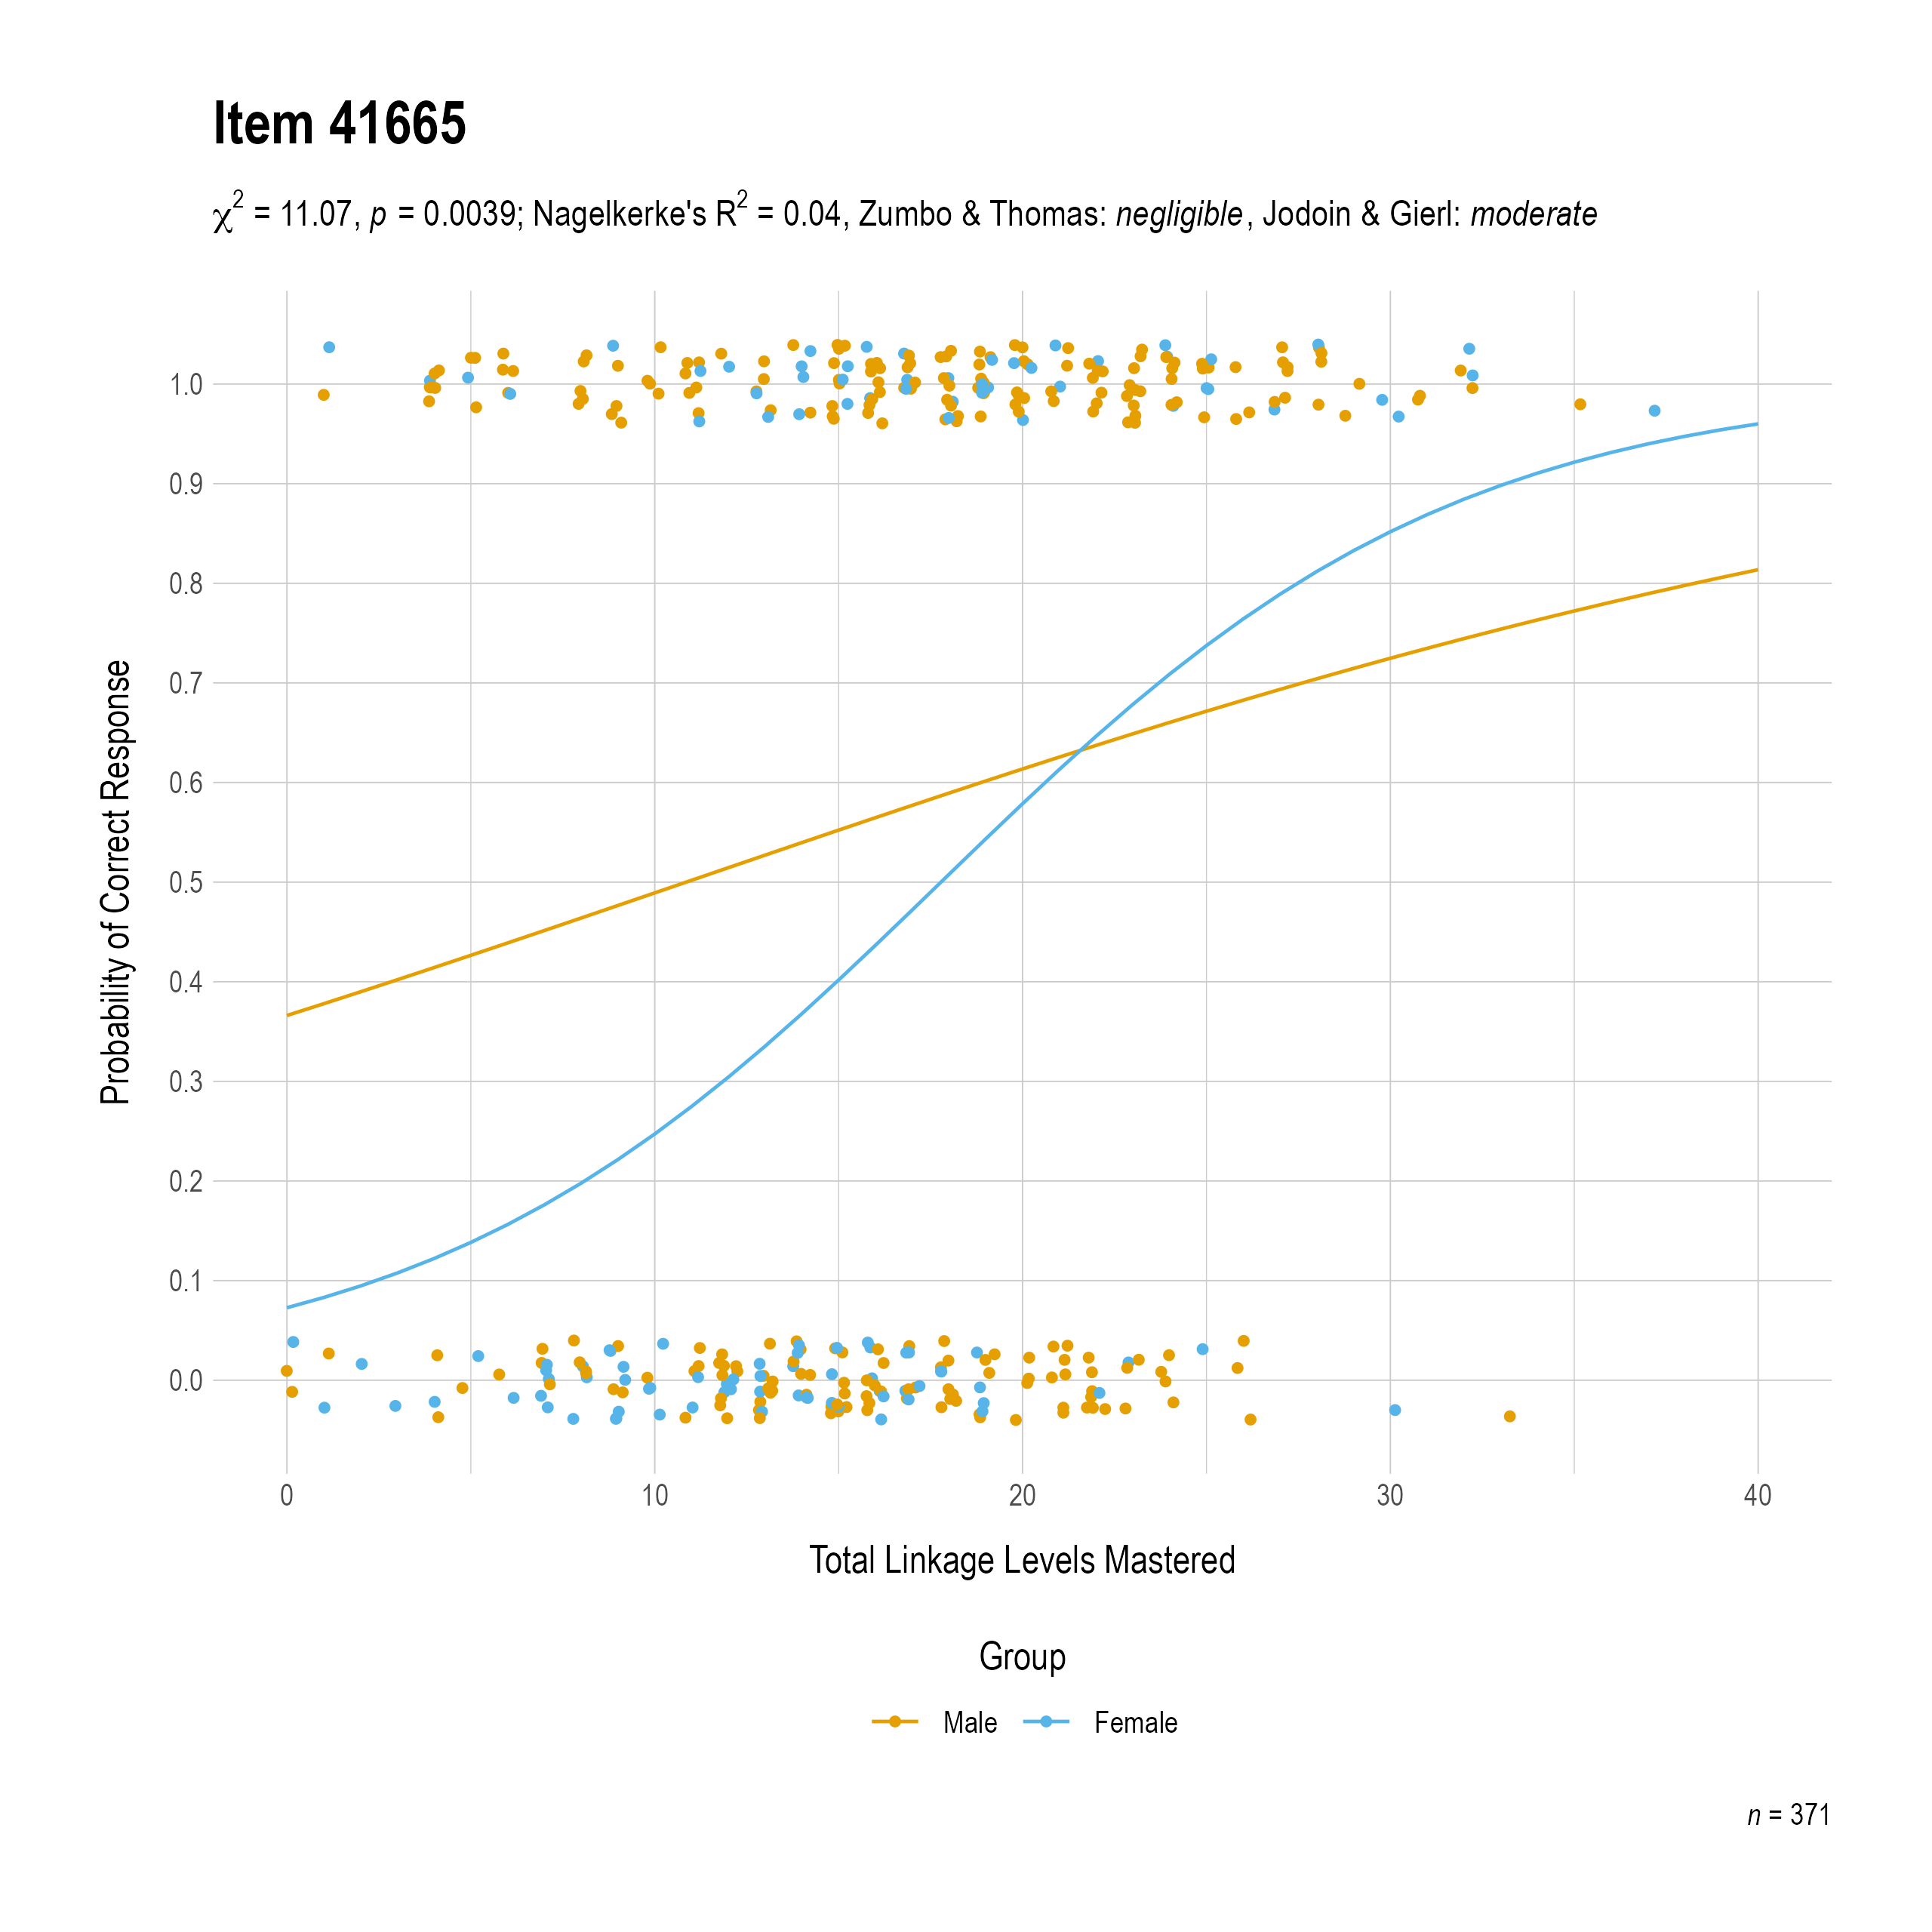 The plot of the combined gender differential item function evidence for Mathematics item 41665. The figure contains points shaded by group. The figure also contains a logistic regression curve for each group. The total linkage levels mastered in is on the x-axis, and the probability of a correct response is on the y-axis.